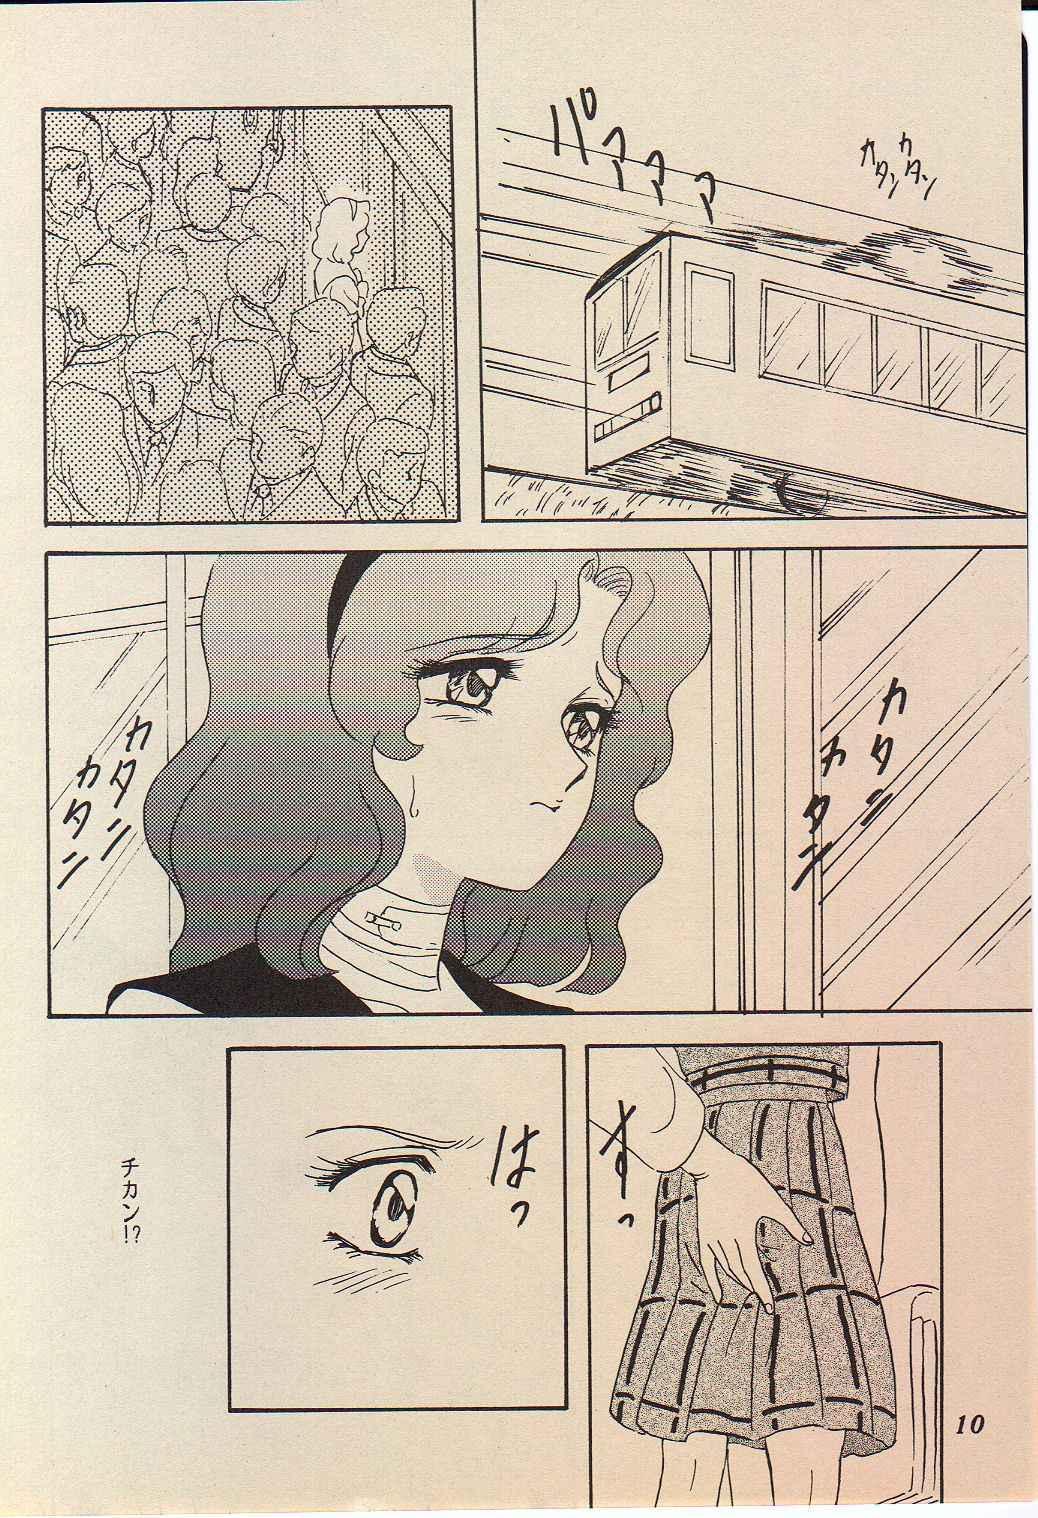 European Porn Lunch Box 11 - Twinkle Twinkle - Sailor moon Gay Medical - Page 9